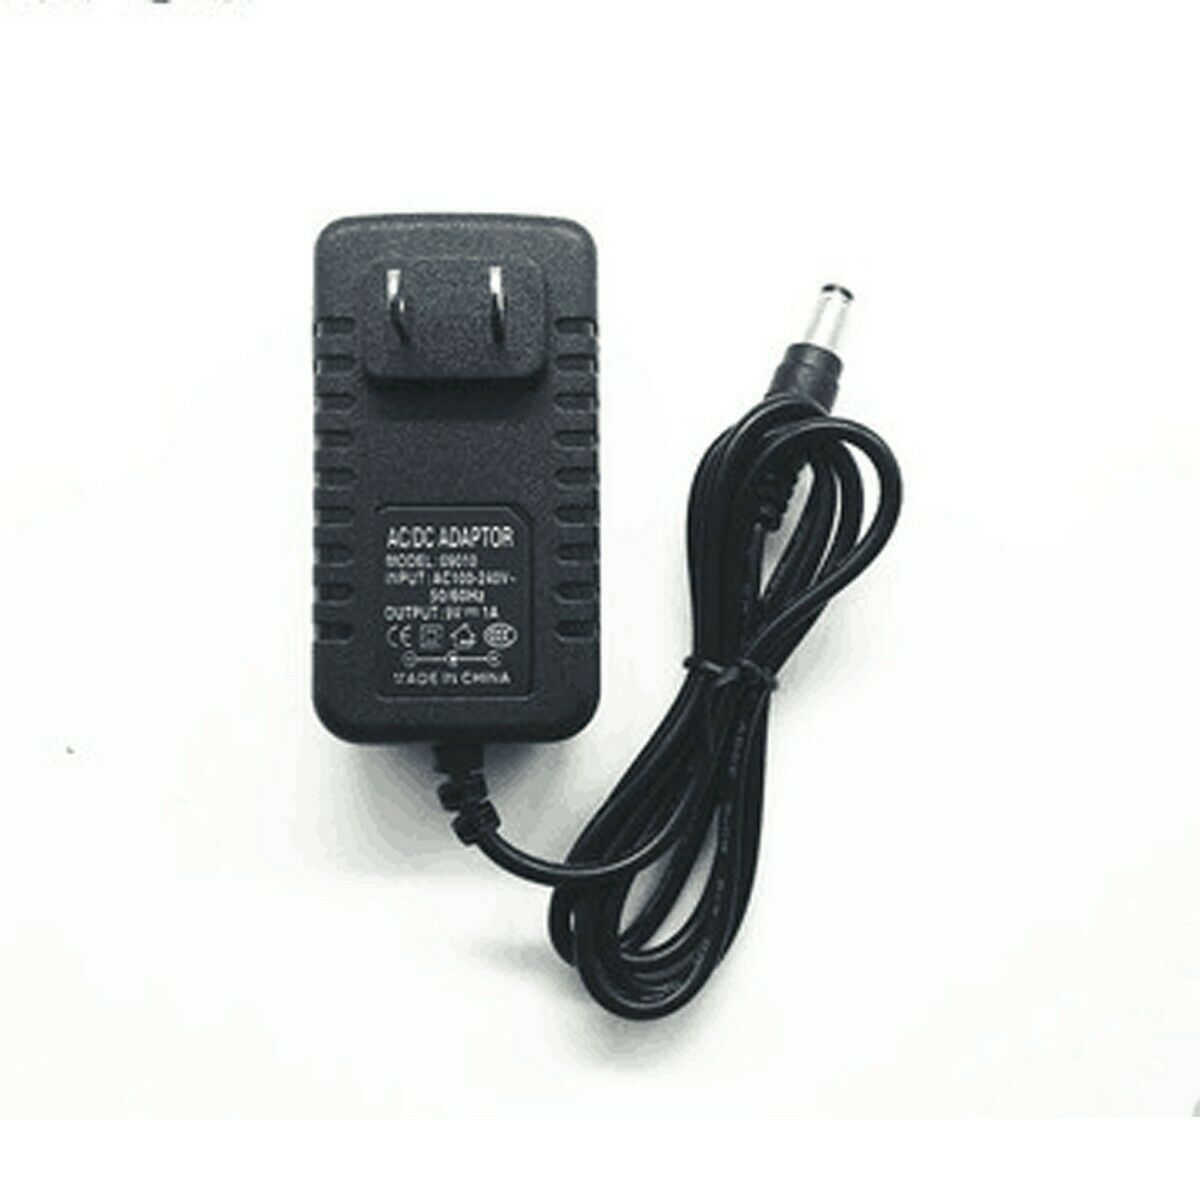 AC - DC Adapter For Honeywell 46-00525 Power Supply MS95XX VOYAGER 1200G 4600525 - Click Image to Close